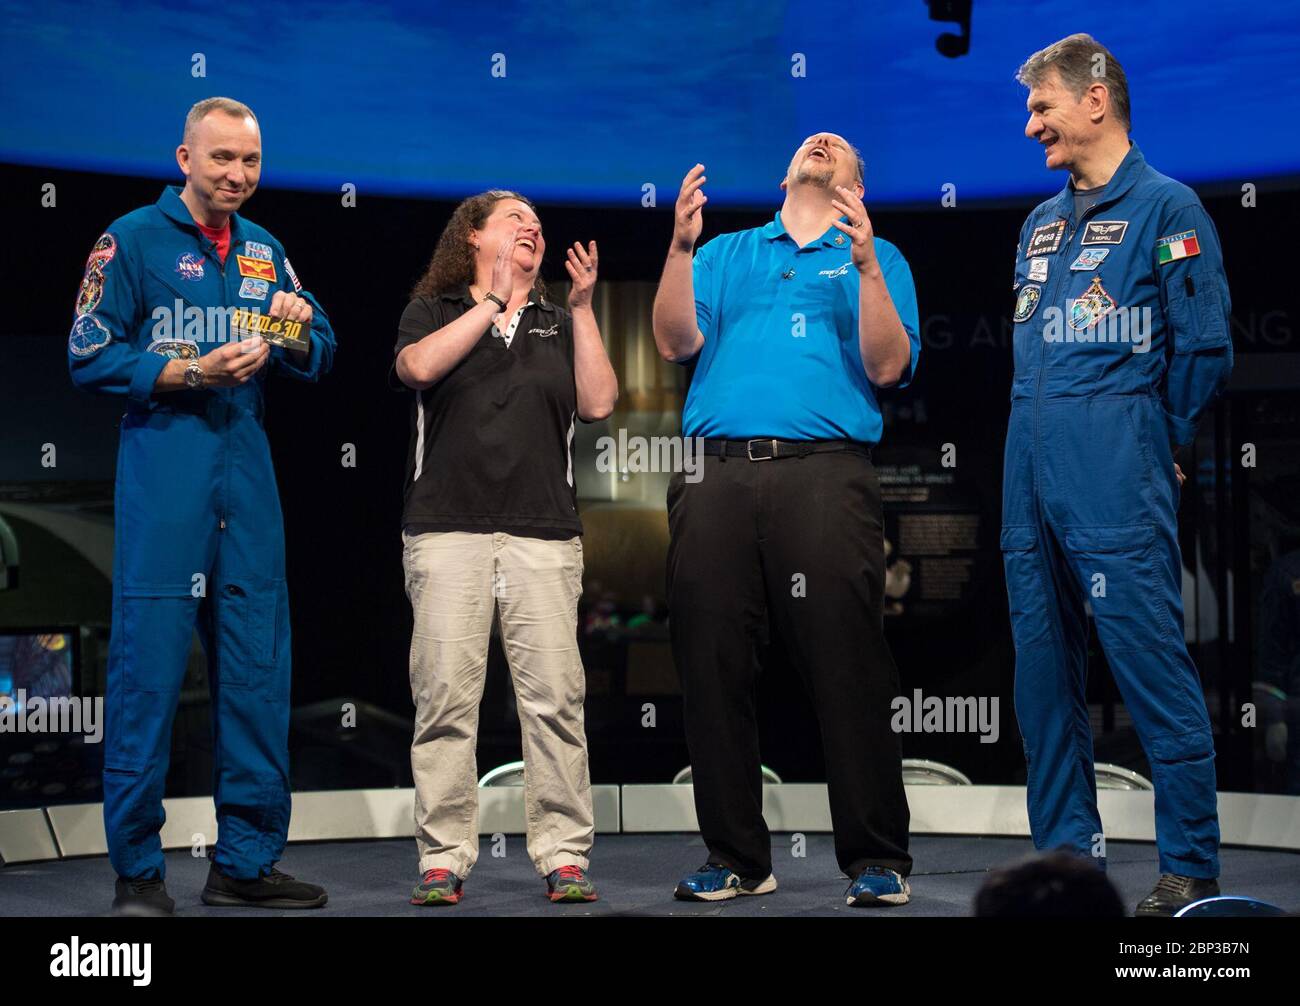 Astronauts Bresnik and Nespoli at National Air and Space Museum  NASA astronaut Randy Bresnik, left, and ESA astronaut Paolo Nespoli, right, present Marty Kelsey, second from right, and Beth Wilson, of STEM in 30 with their bookmark that flew in space onboard the International Space Station during expeditions 52/53, Thursday, May 10, 2018 at the Smithsonian National Air and Space Museum in Washington. Stock Photo